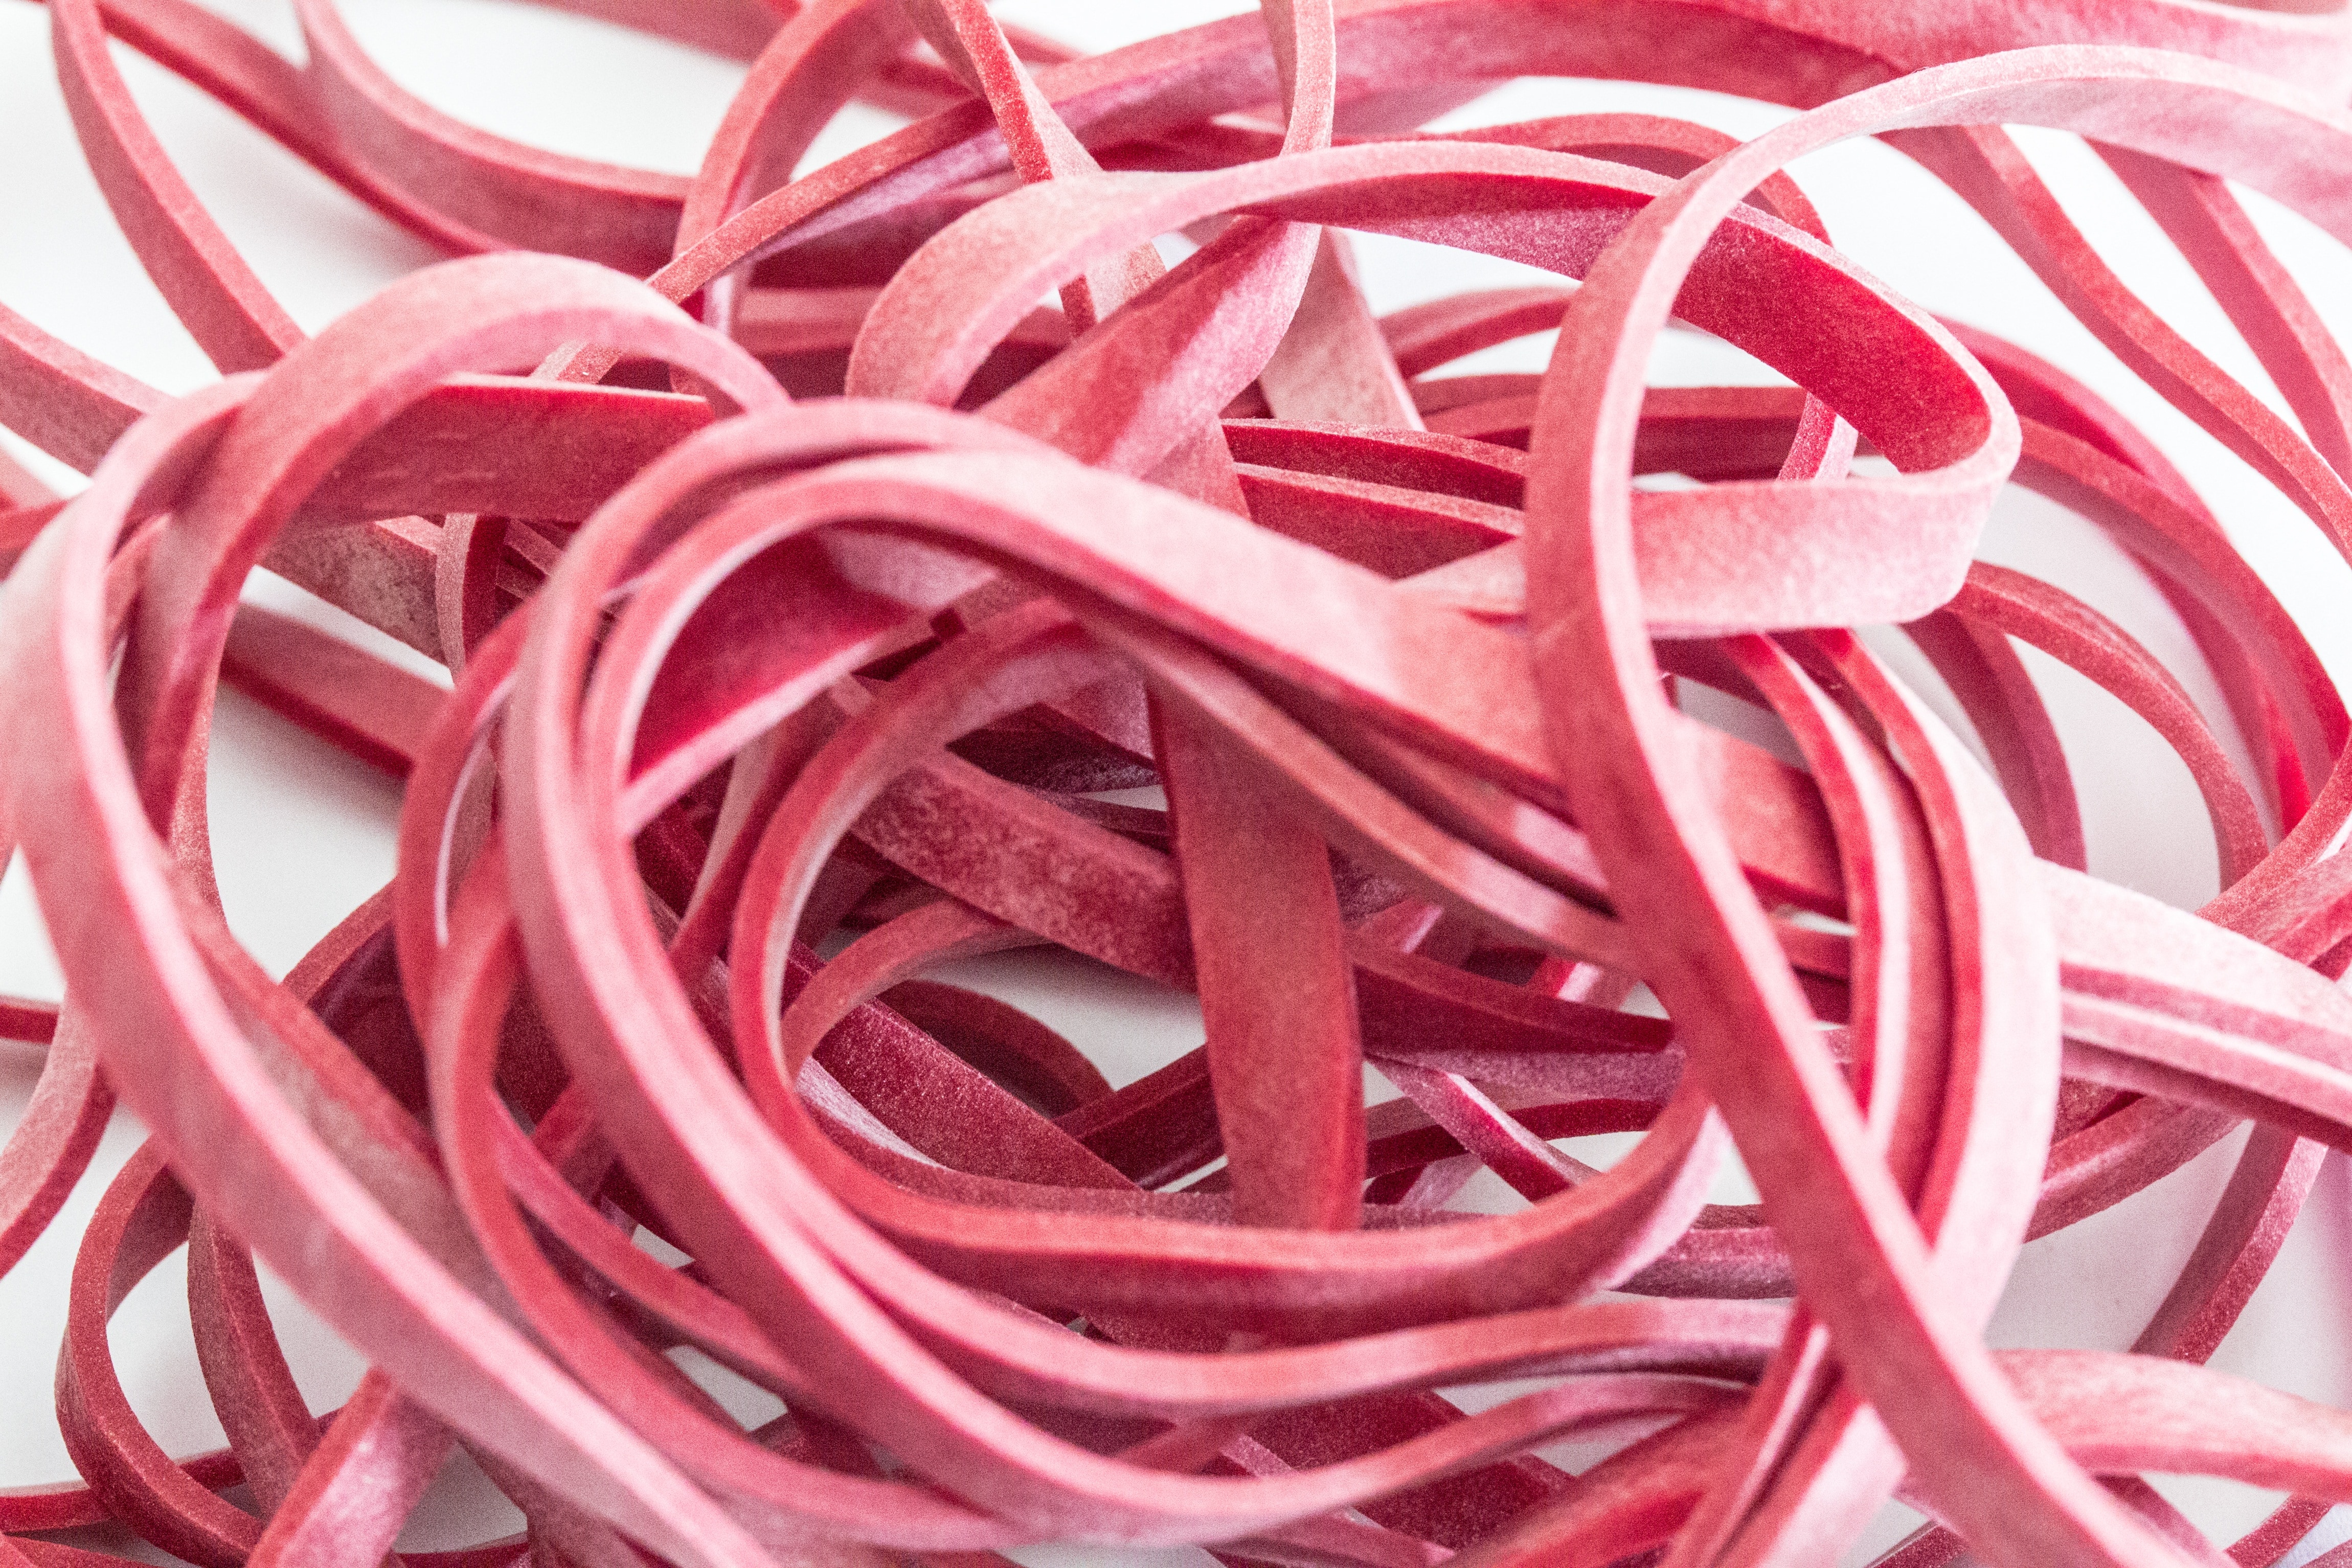 red rubber band